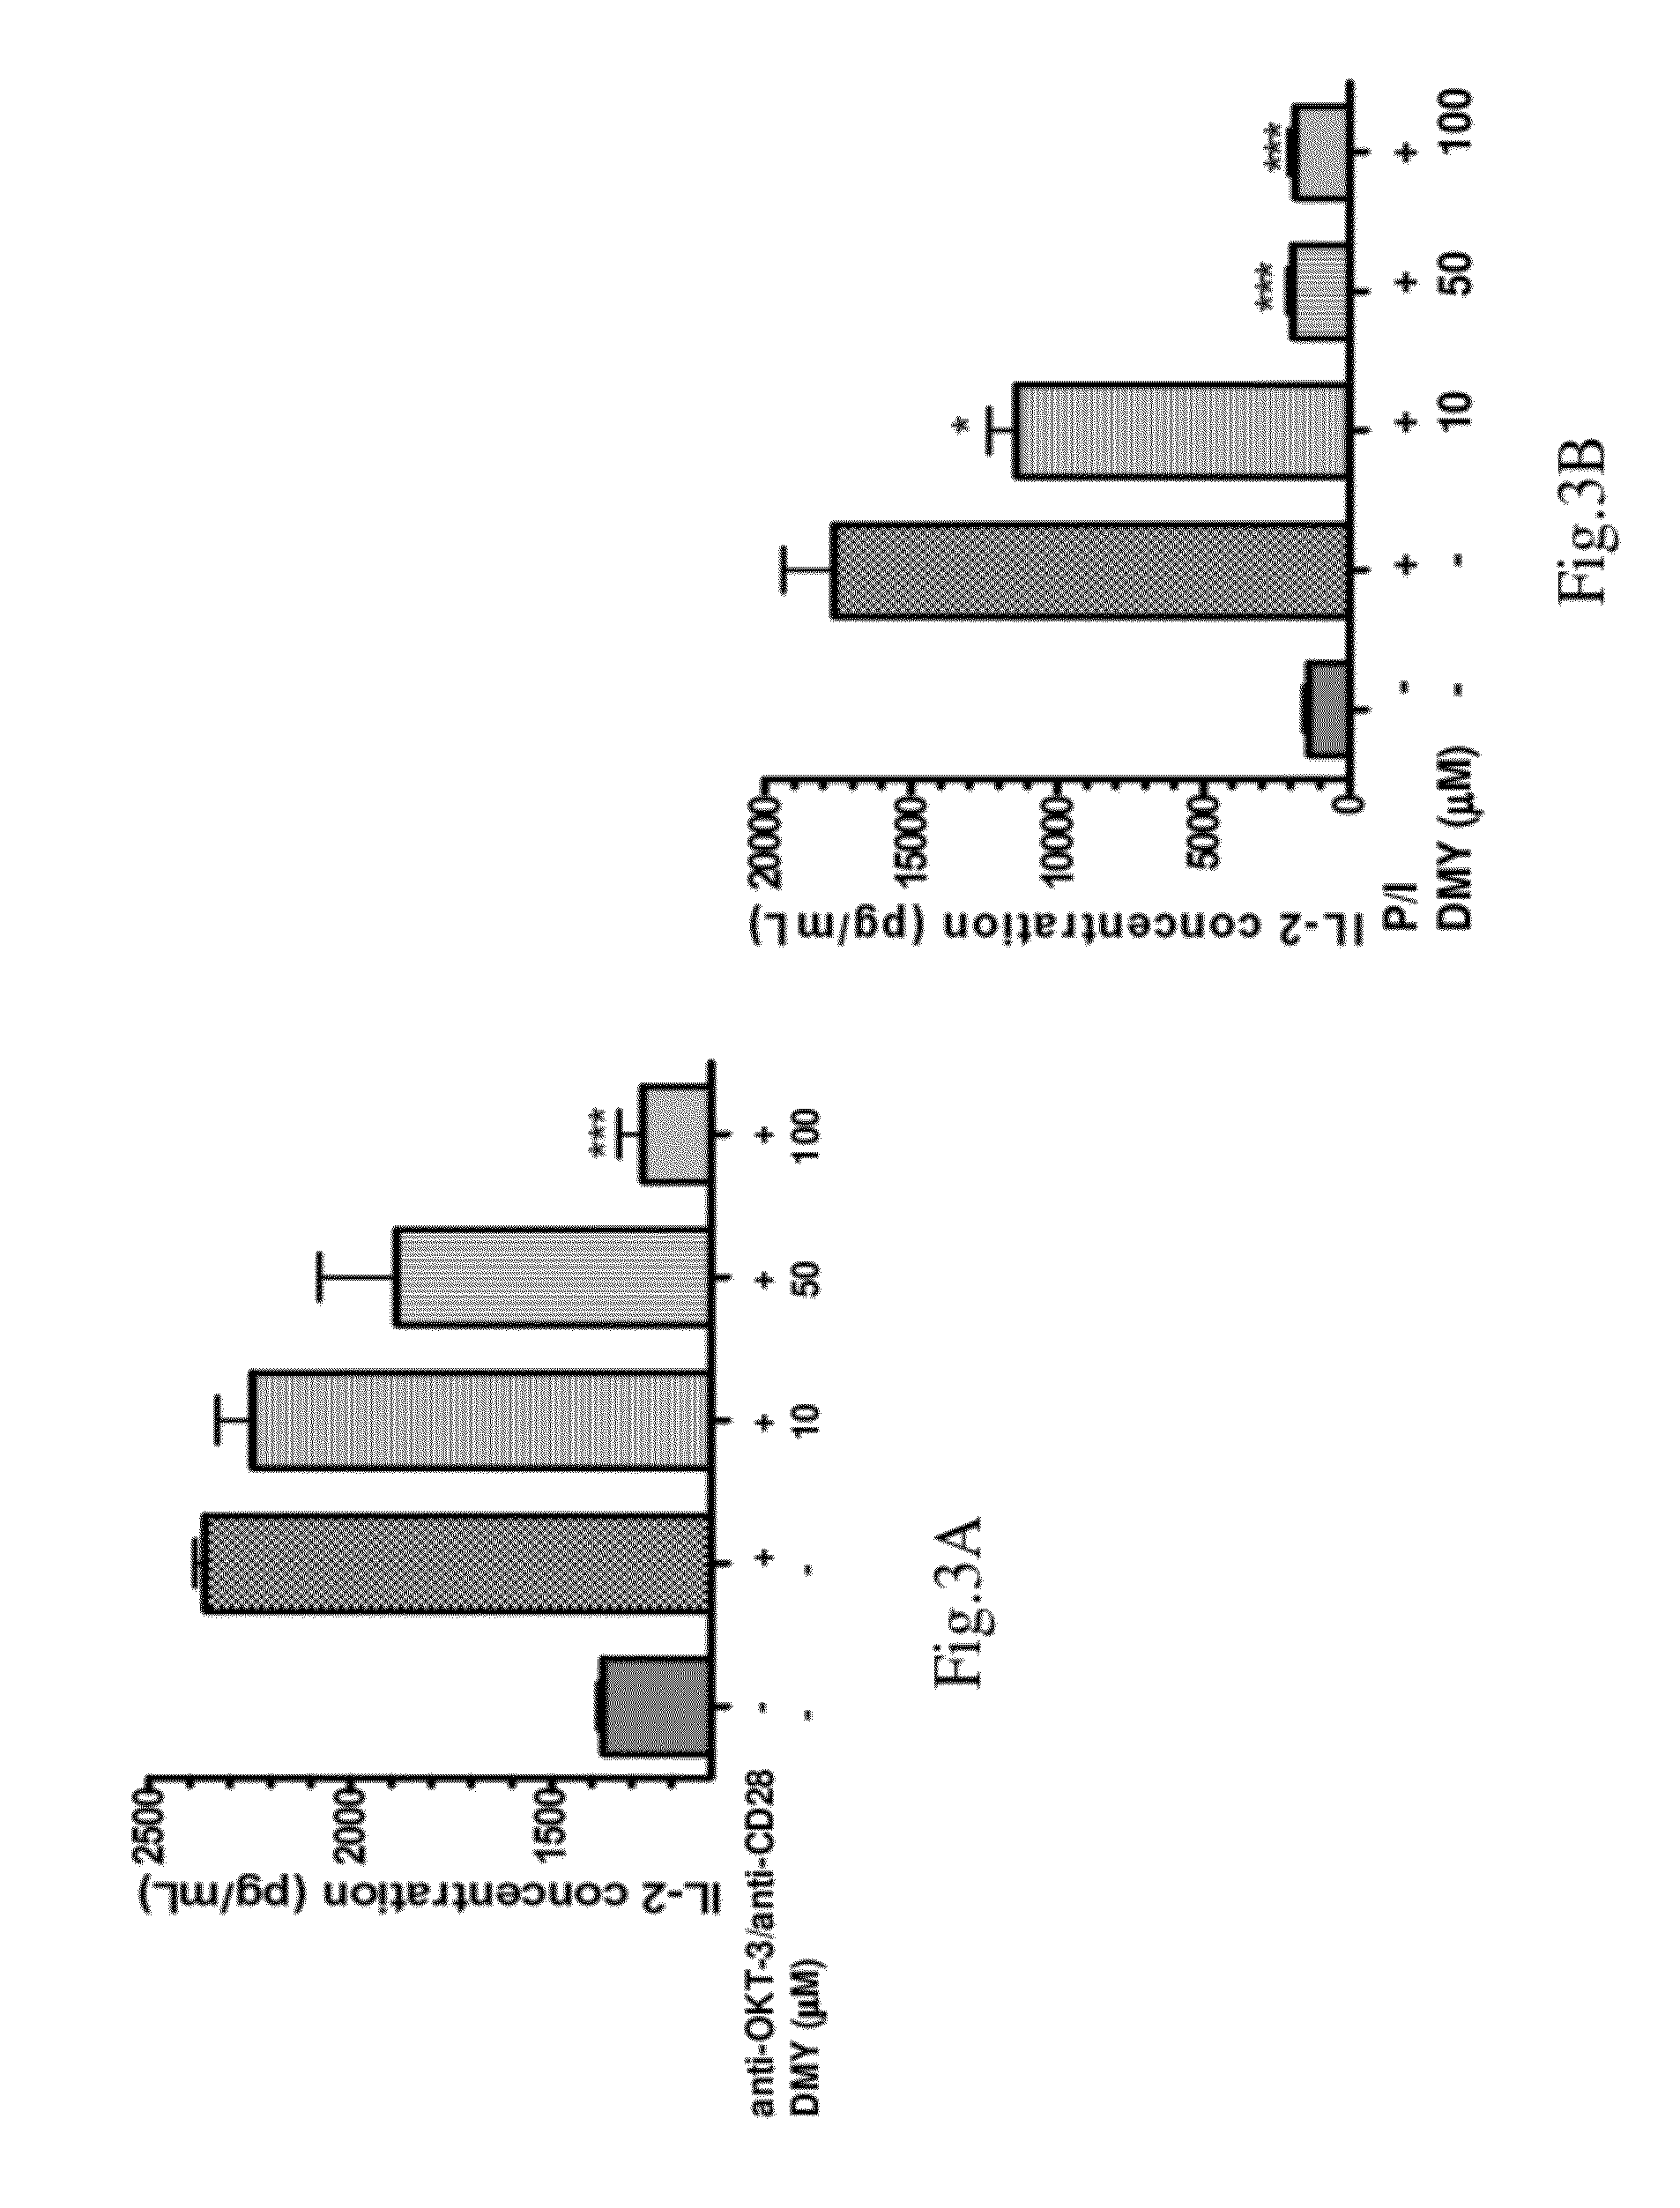 Dihydromyricetin as an IKK-beta inhibitor used for treatment of arthritis, cancer and autoimmune conditions, and other diseases or disorders